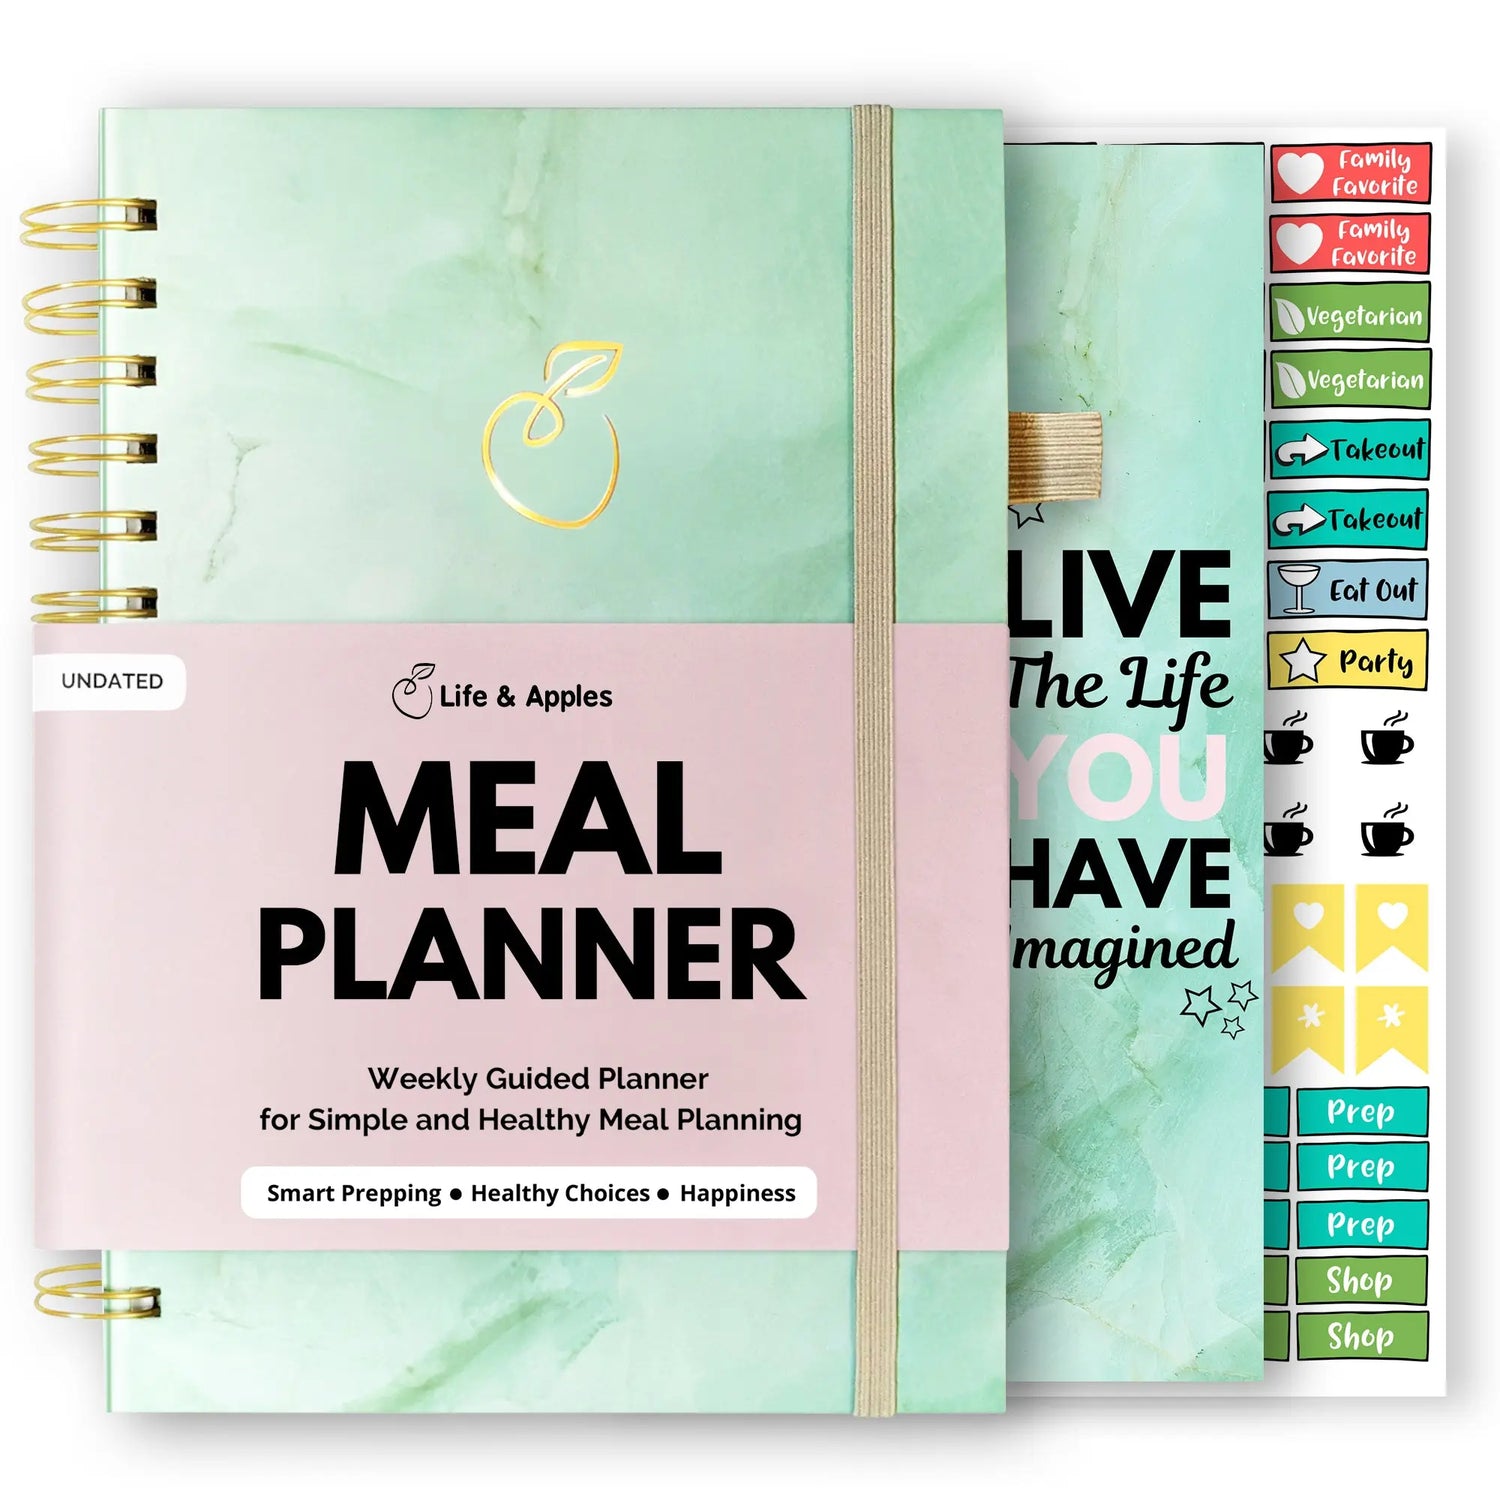 Meal Planner - Life & Apples